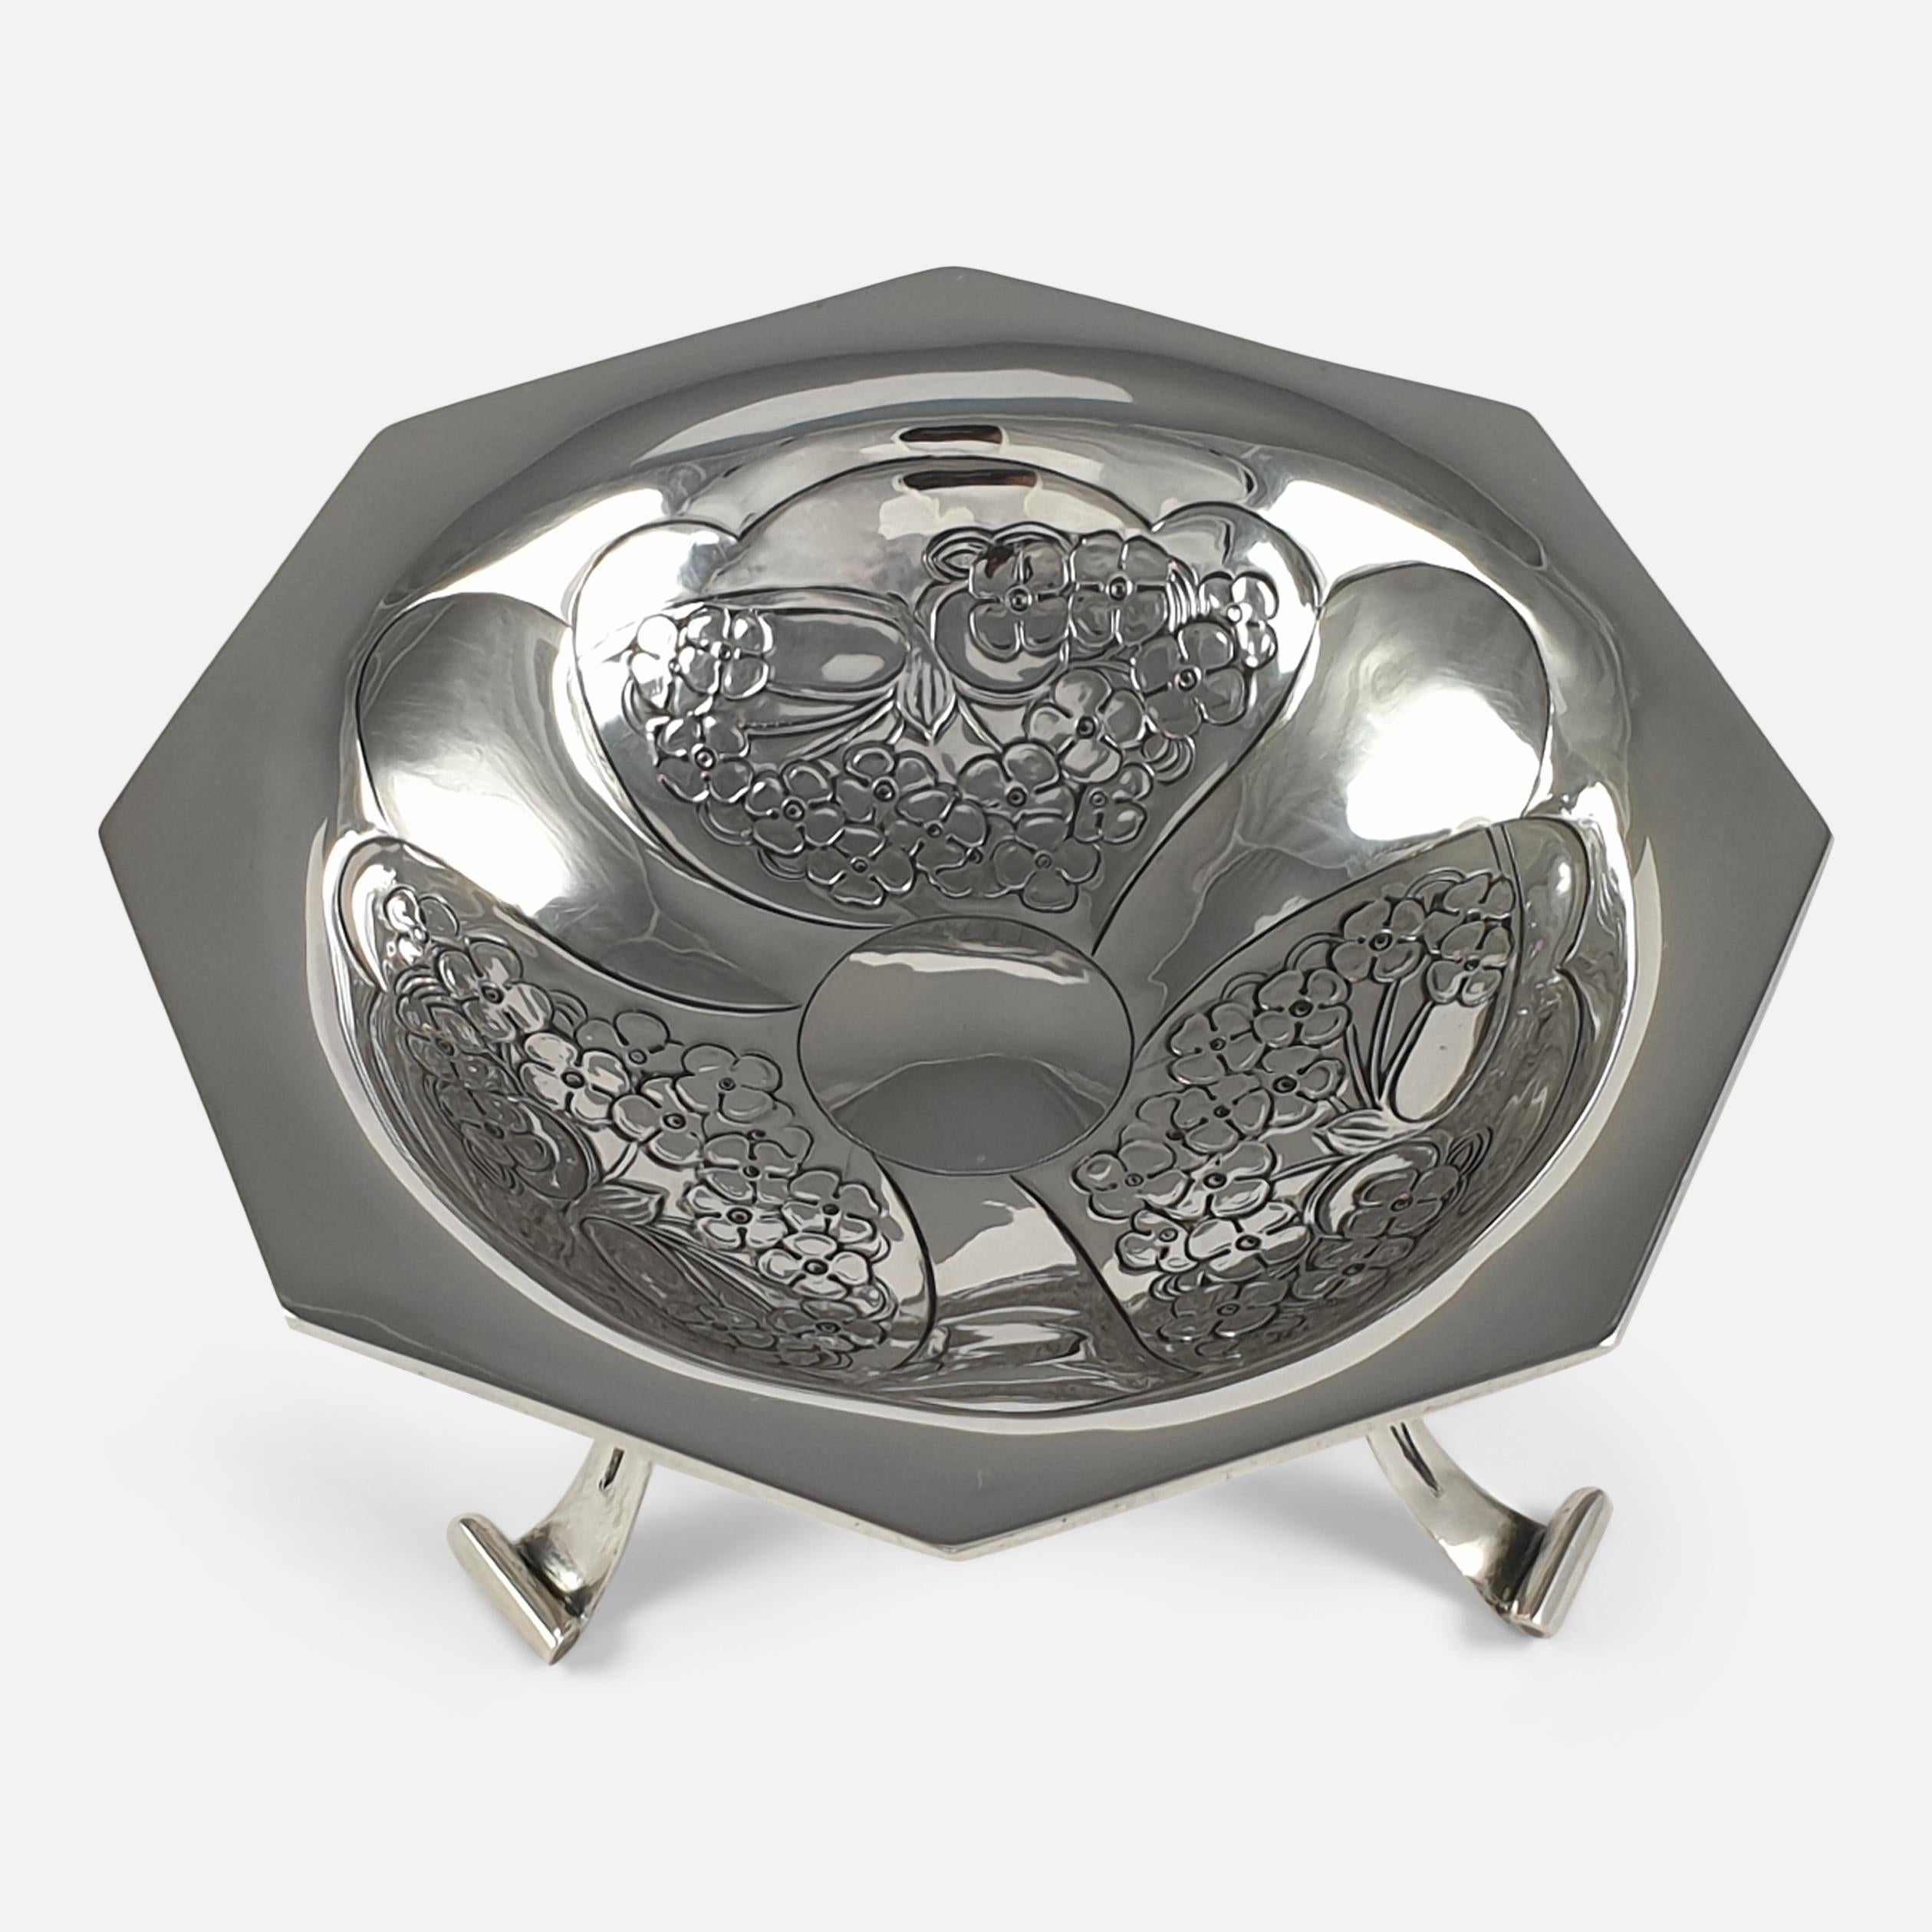 An Edwardian Art Nouveau sterling silver Tazza designed by Kate Harris for W.G. Connell. The Tazza is of octagonal form, with a chased foliate decoration to the bowl, and sits on three pierced scroll legs. It is hallmarked with the makers mark of